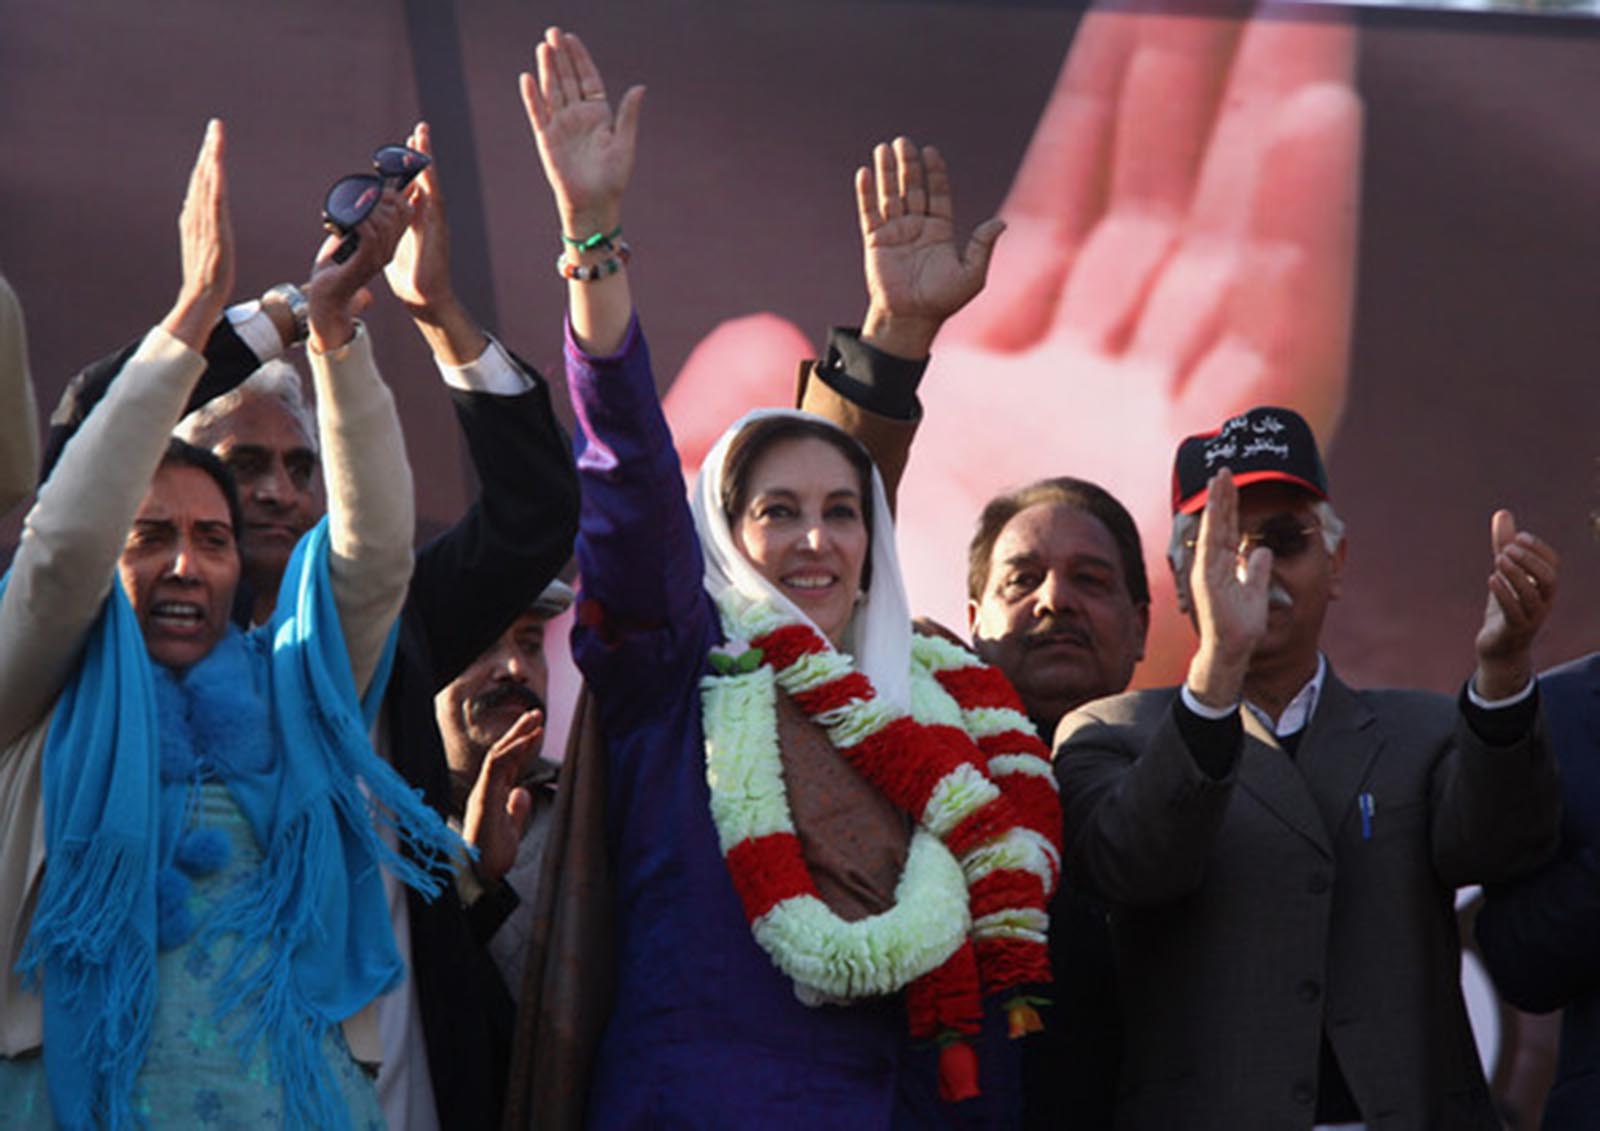 'I see a lot of violence ahead,' said Benazir Bhutto a few hours before she was martyred